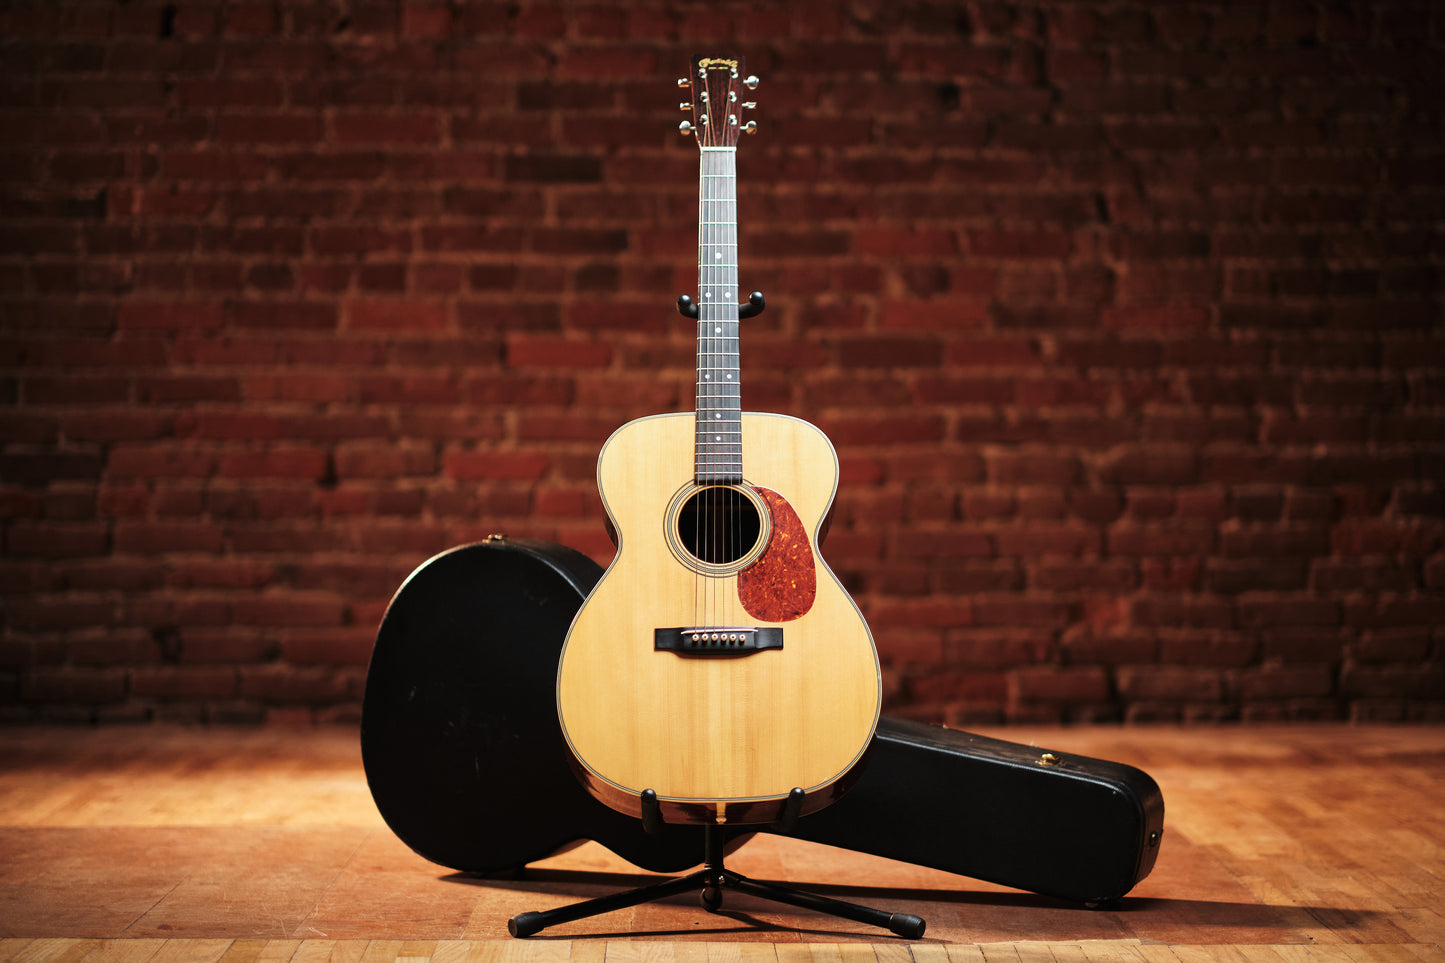 1957 Martin 000-28 [*One Owner!]